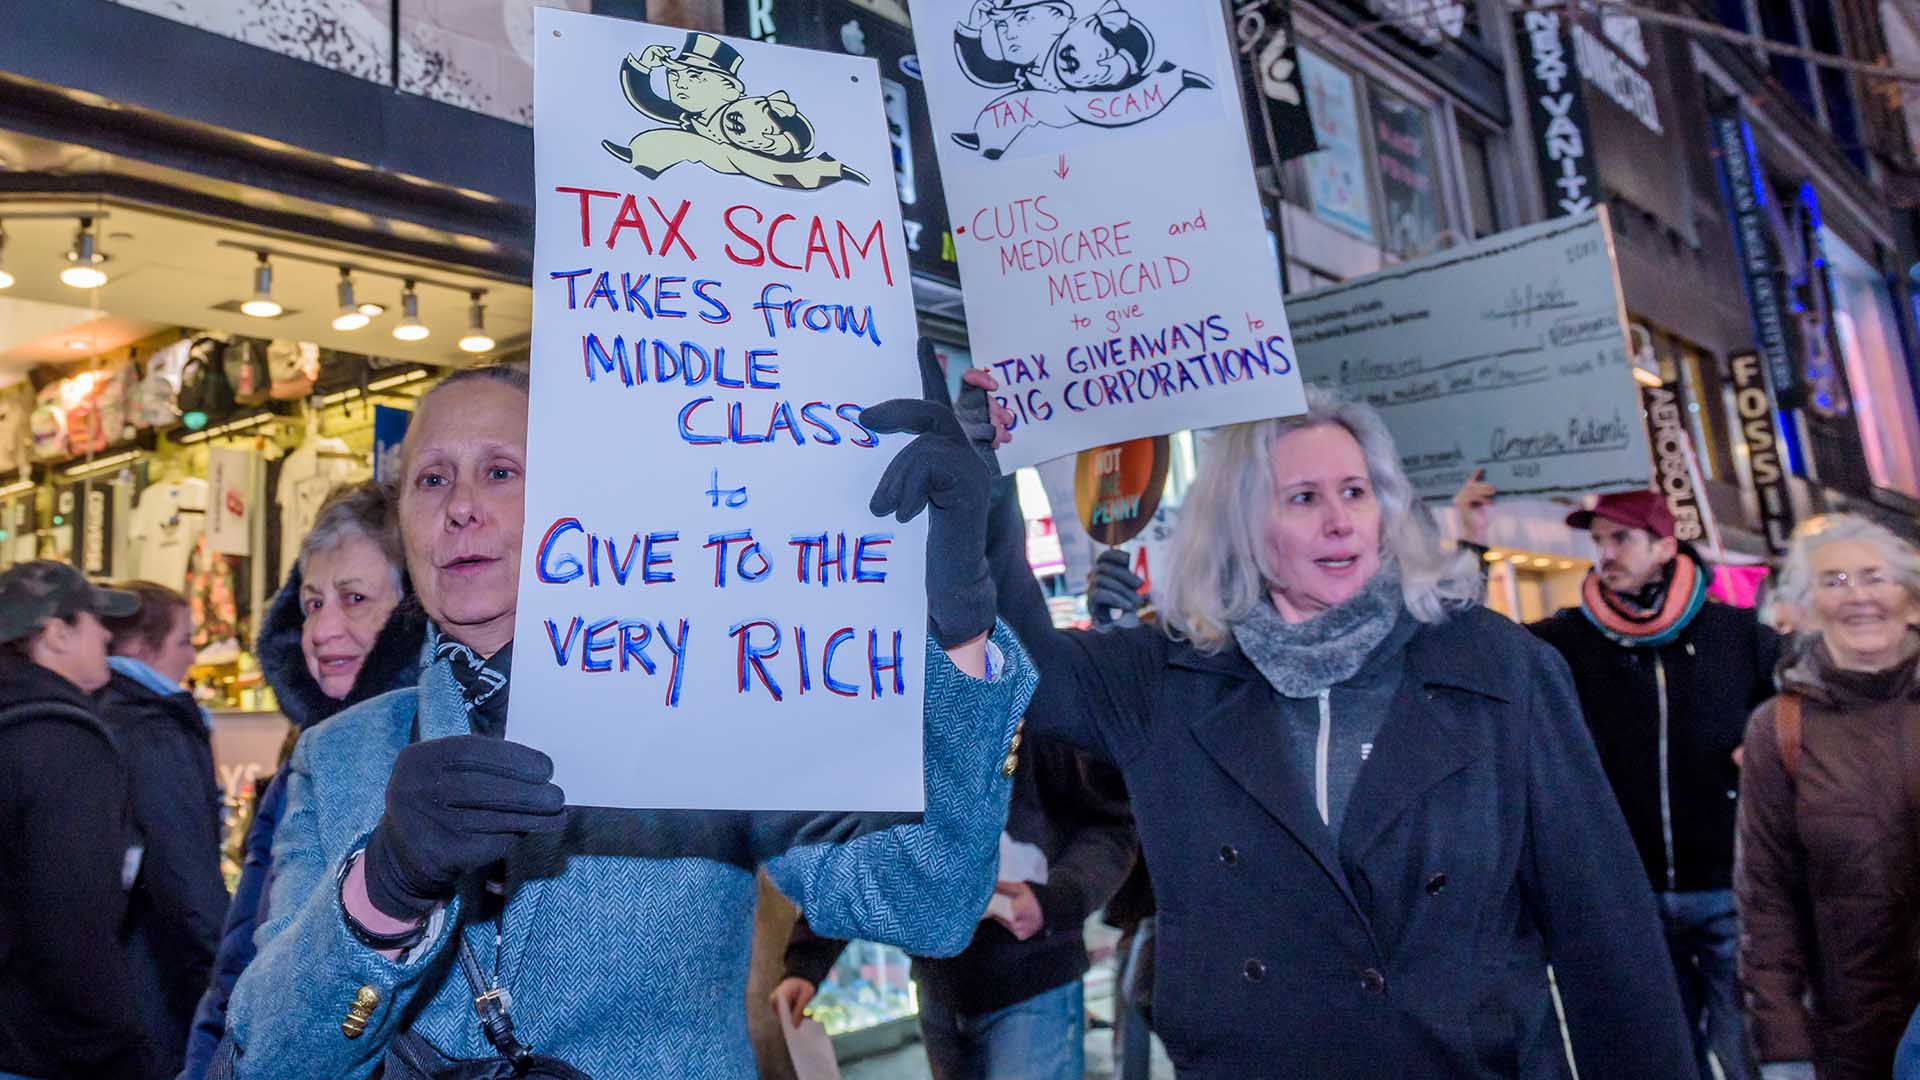 Protesters hold up handmade signs with written messages about tax scams and inequality.